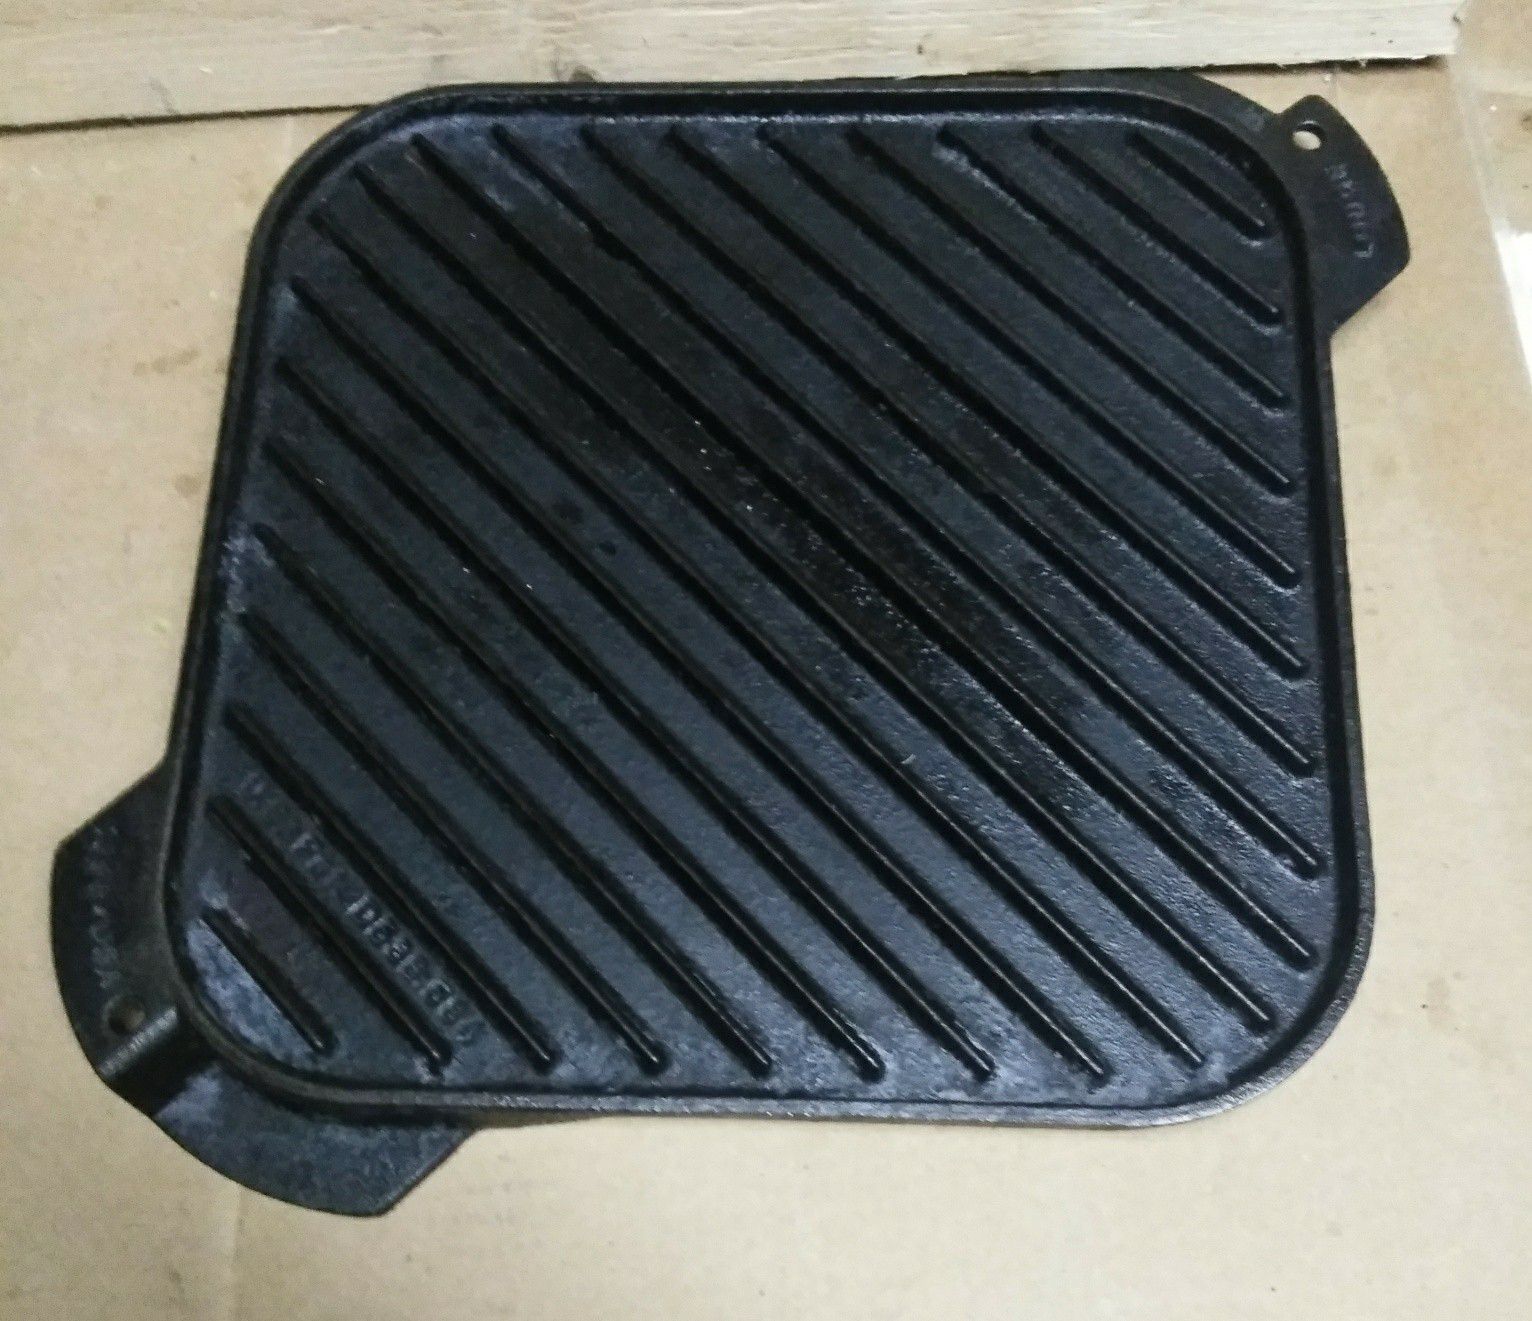 LODGE LSRG3 Cast Iron Single-Burner Reversible Grill 10.5 inch Flat Ribbed  for Sale in Snohomish, WA OfferUp